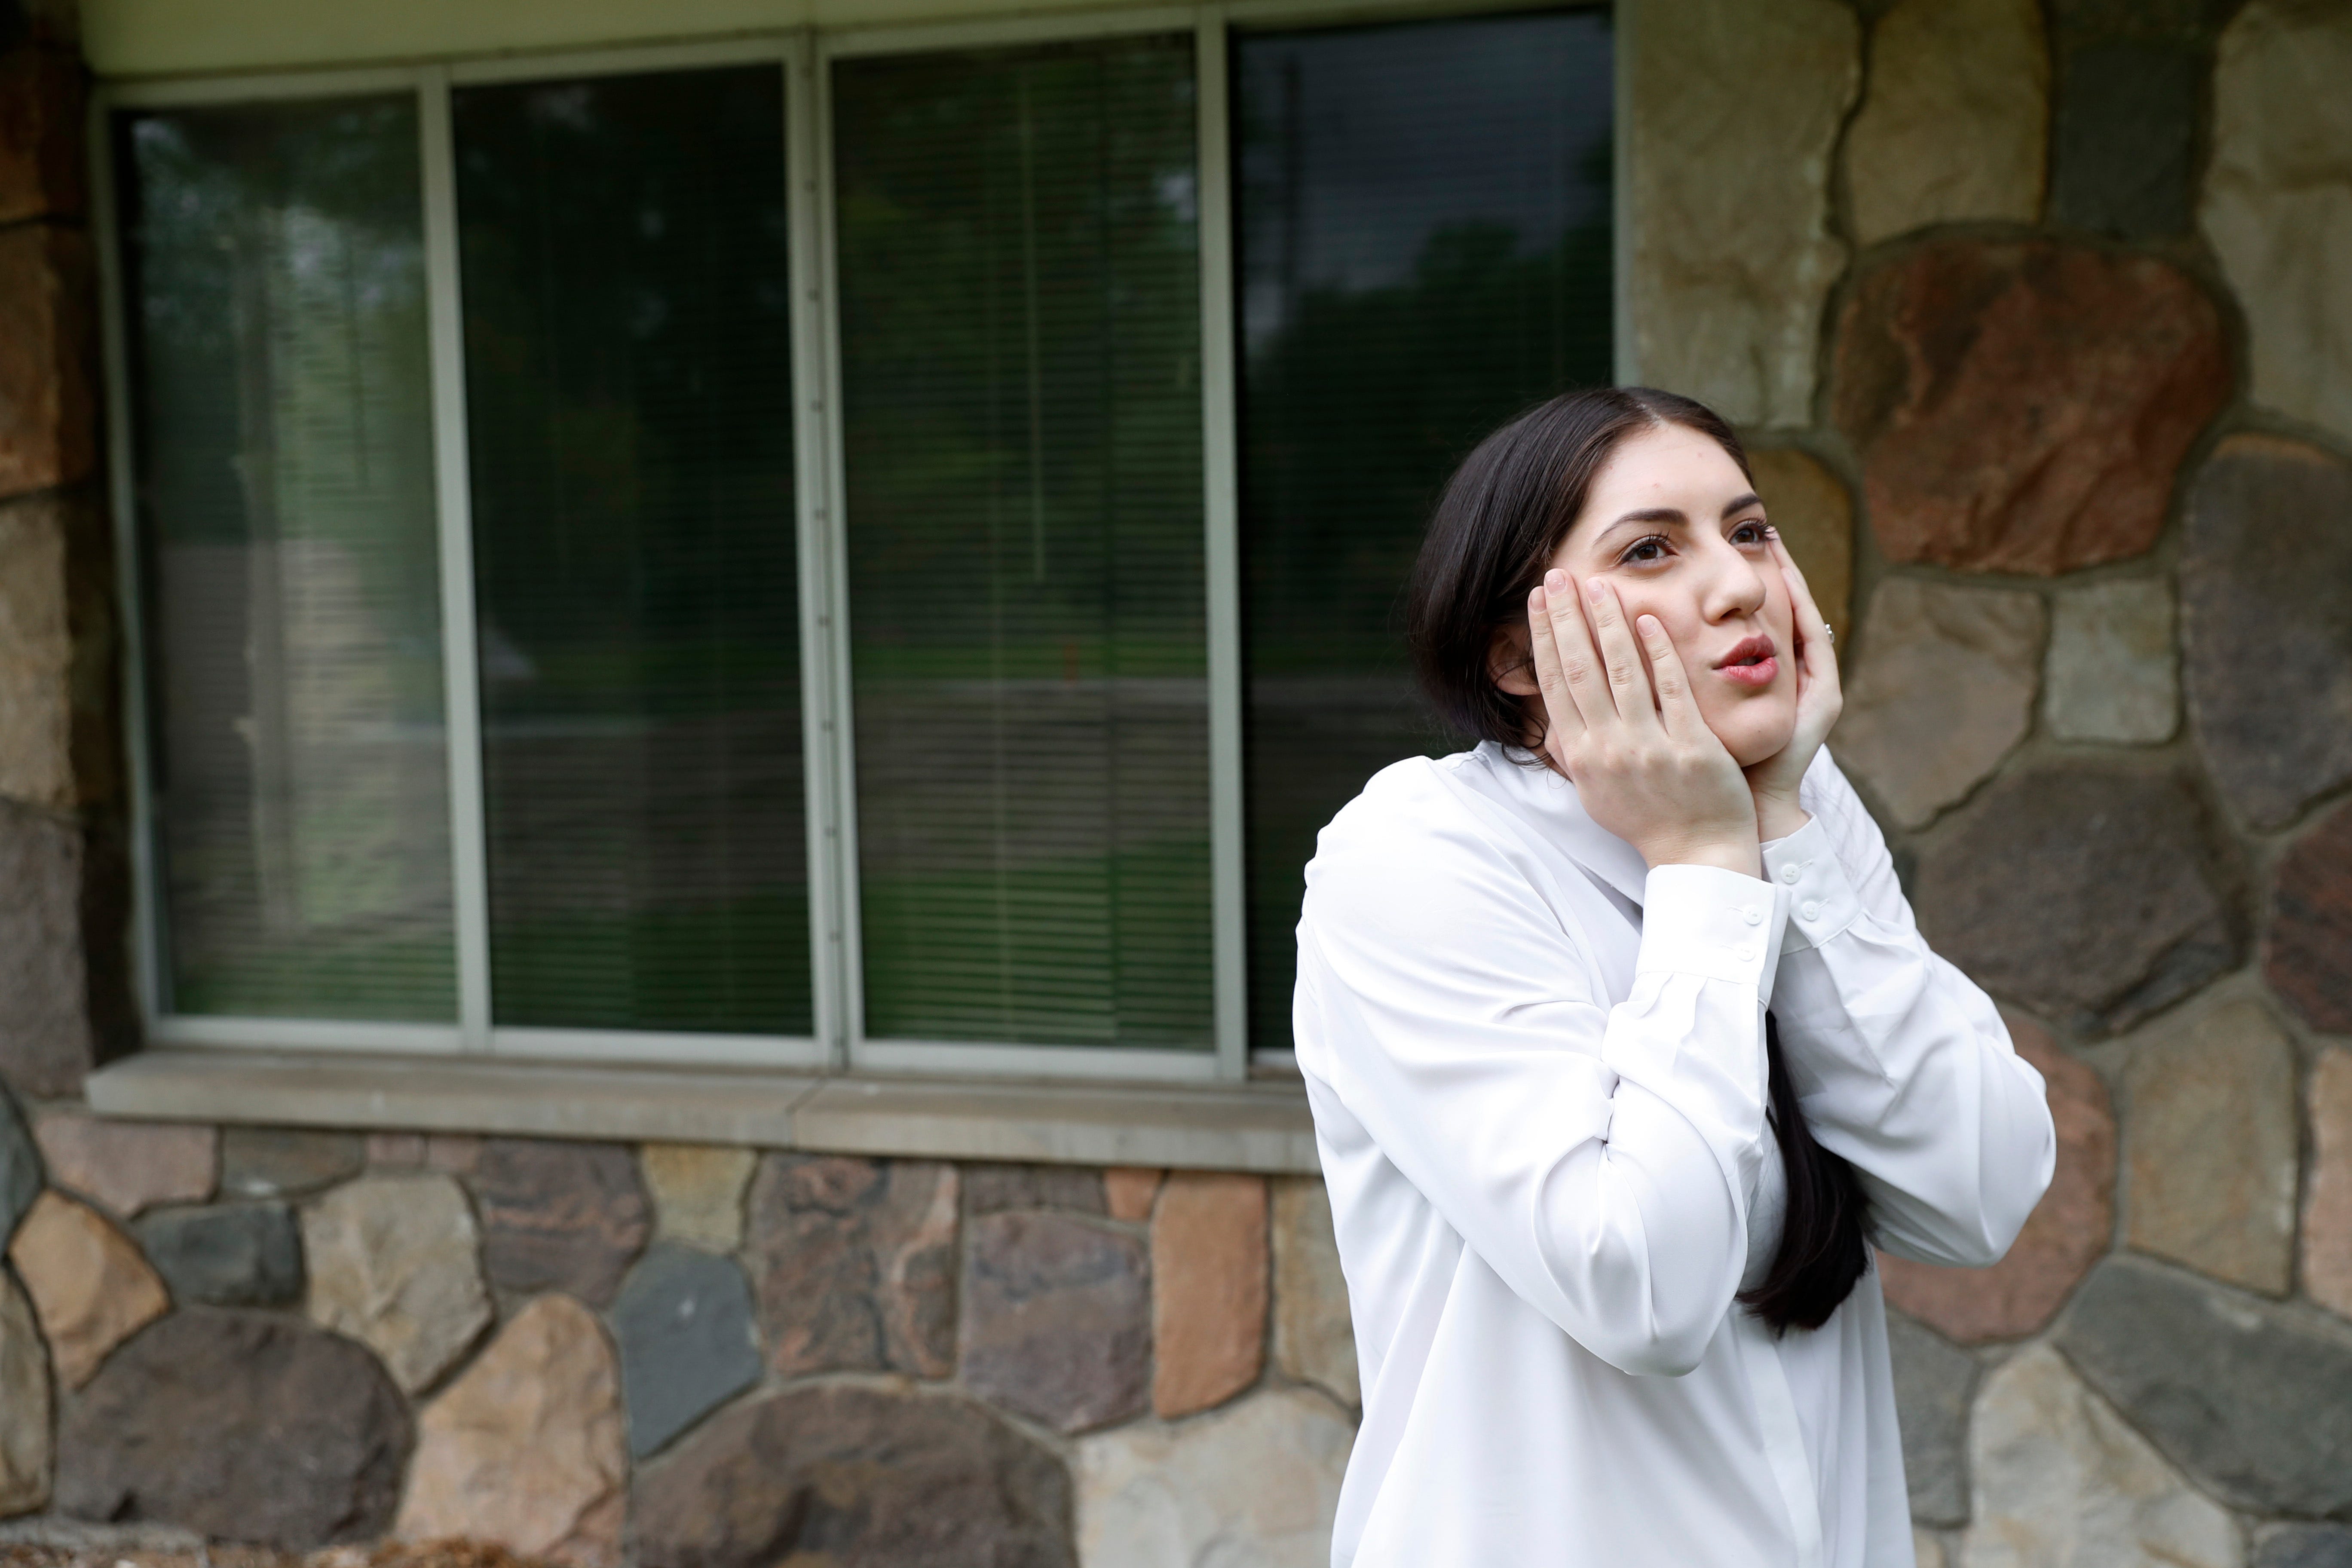 Mary Rose Maher, the daughter of Opus Bono Sacerdotii co-founder Joe Maher, visits a former Opus Bono location in Oxford, Michigan, June 5. In a February 2017 letter to the state attorney general, she wrote, a simple investigation into the Michigan nonprofit charity Opus Bono Sacerdotii would bring to light the millions of embezzled dollars, years of mail fraud, and the constant systemic abuse of donations.